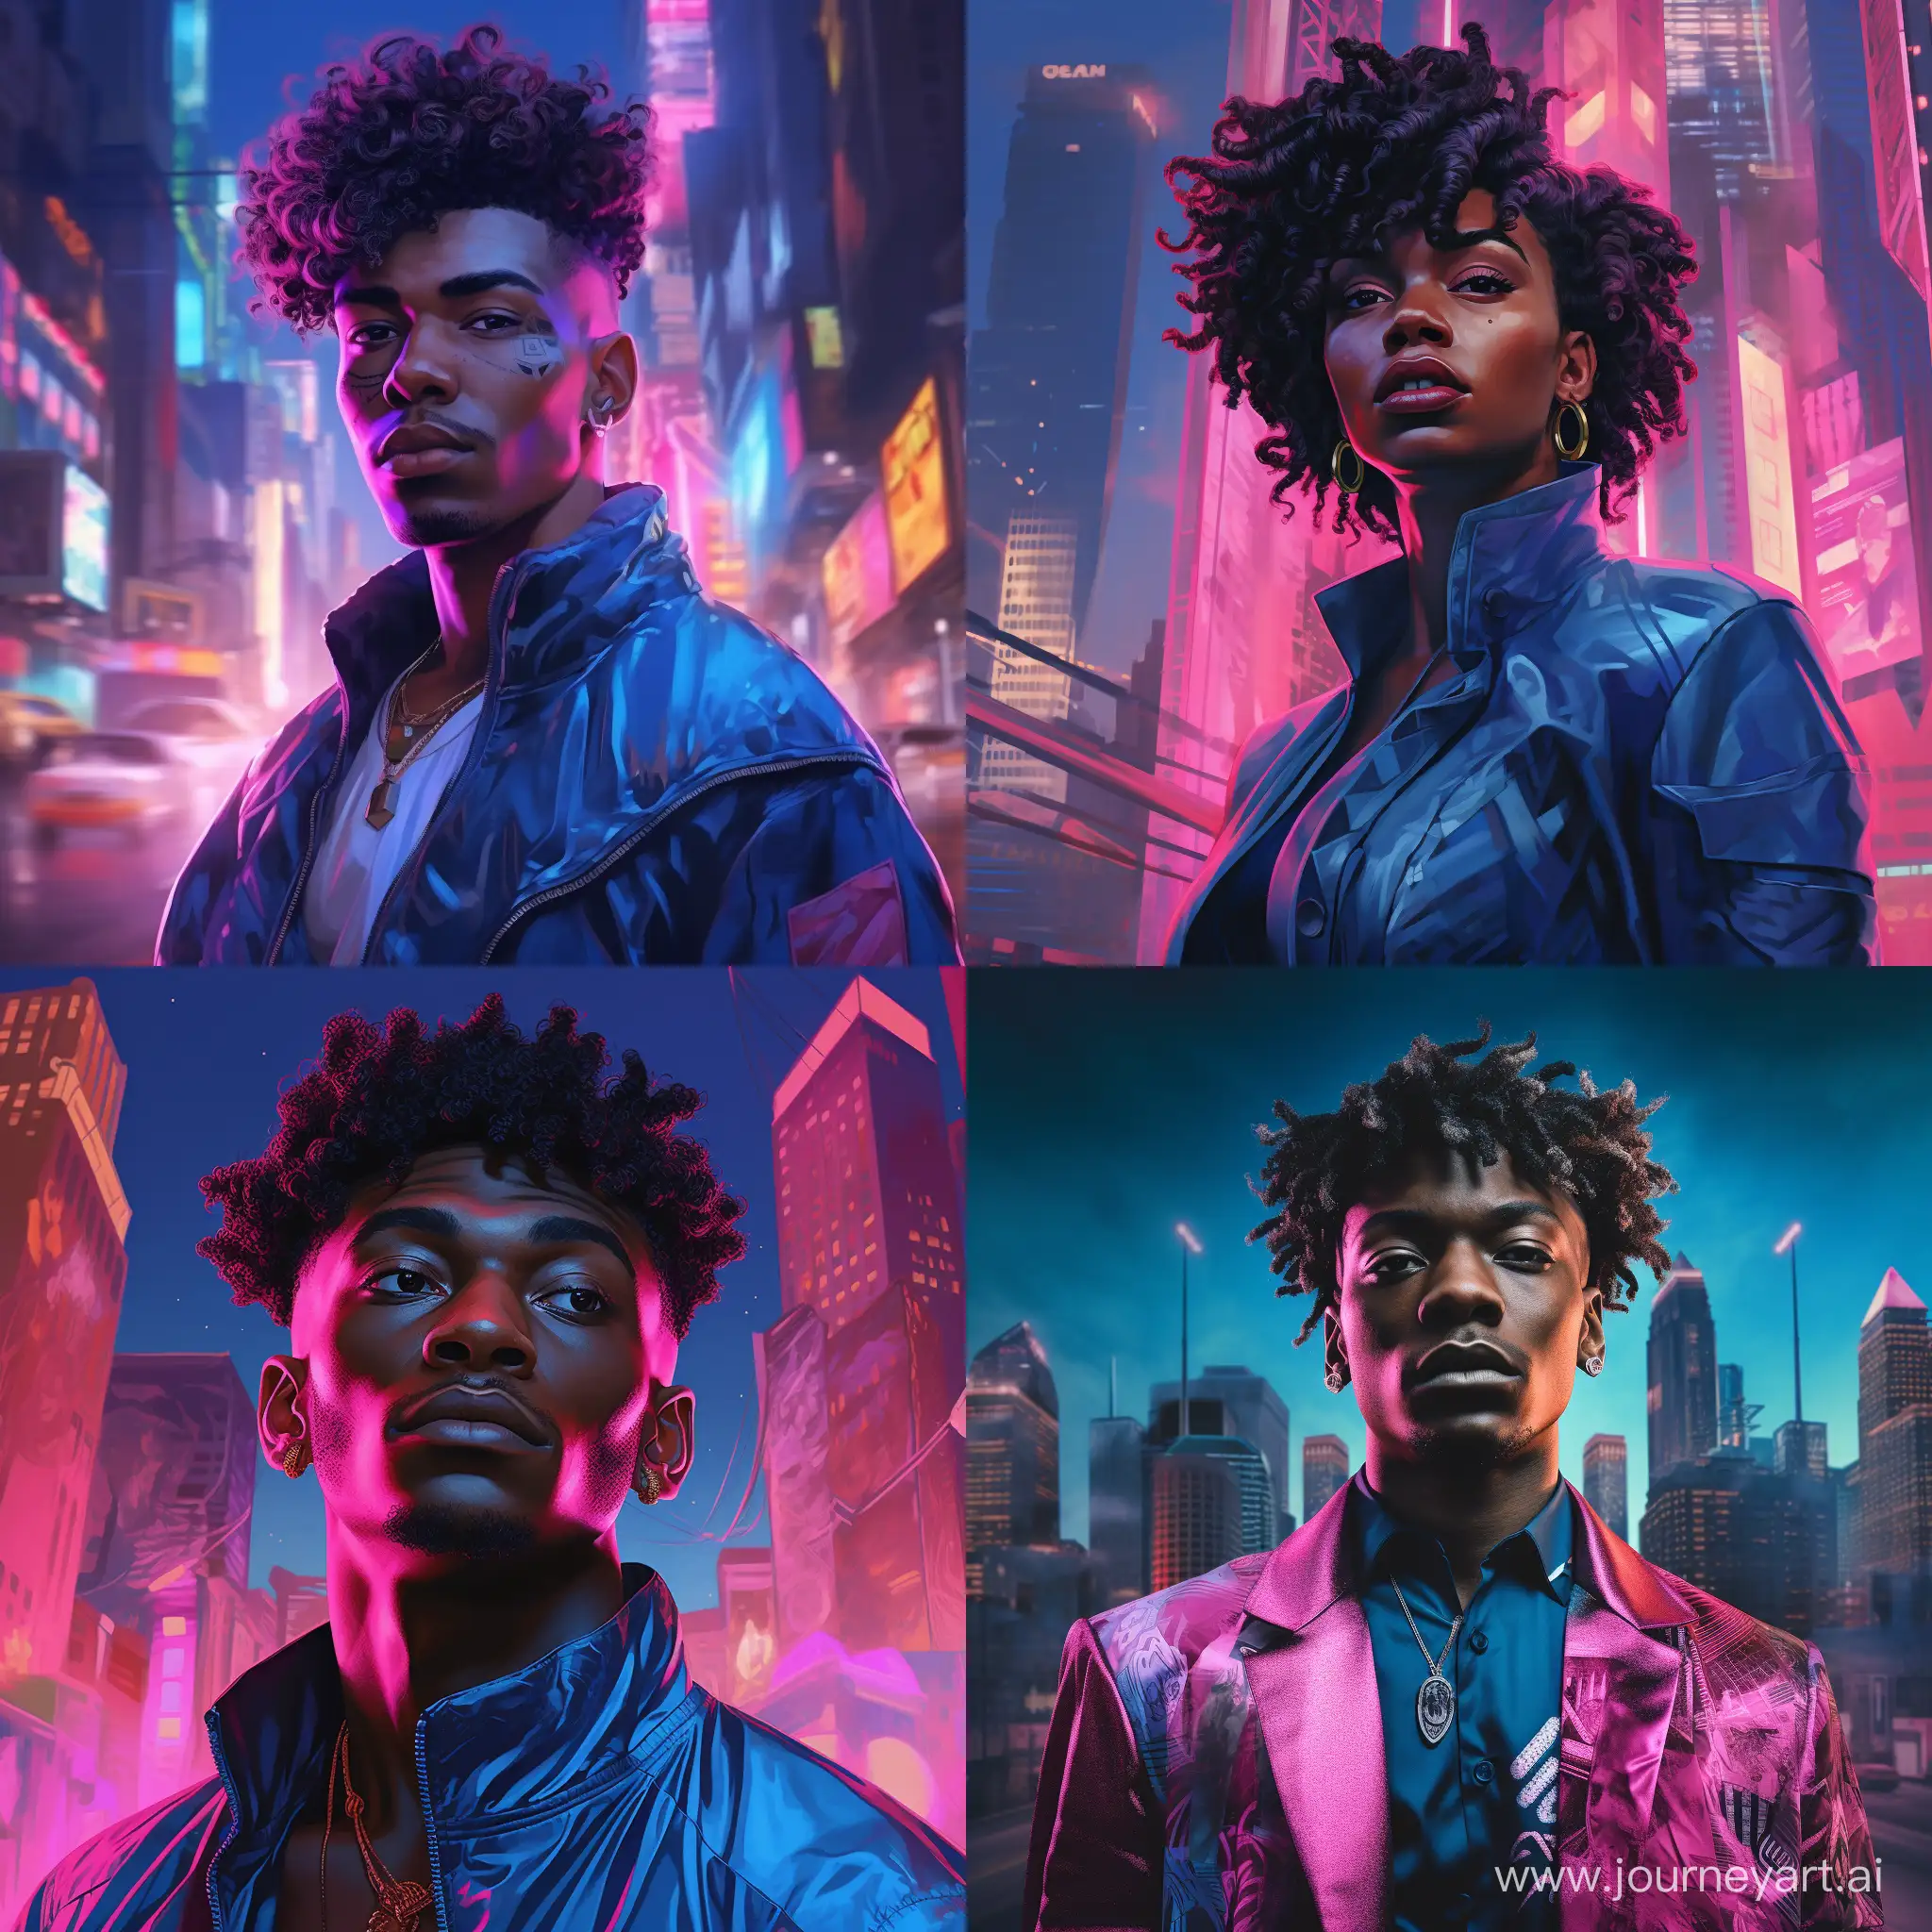 Hyper realistic cyberpunk portrait of black man with short curly hair in neon blue and pink futuristic city
